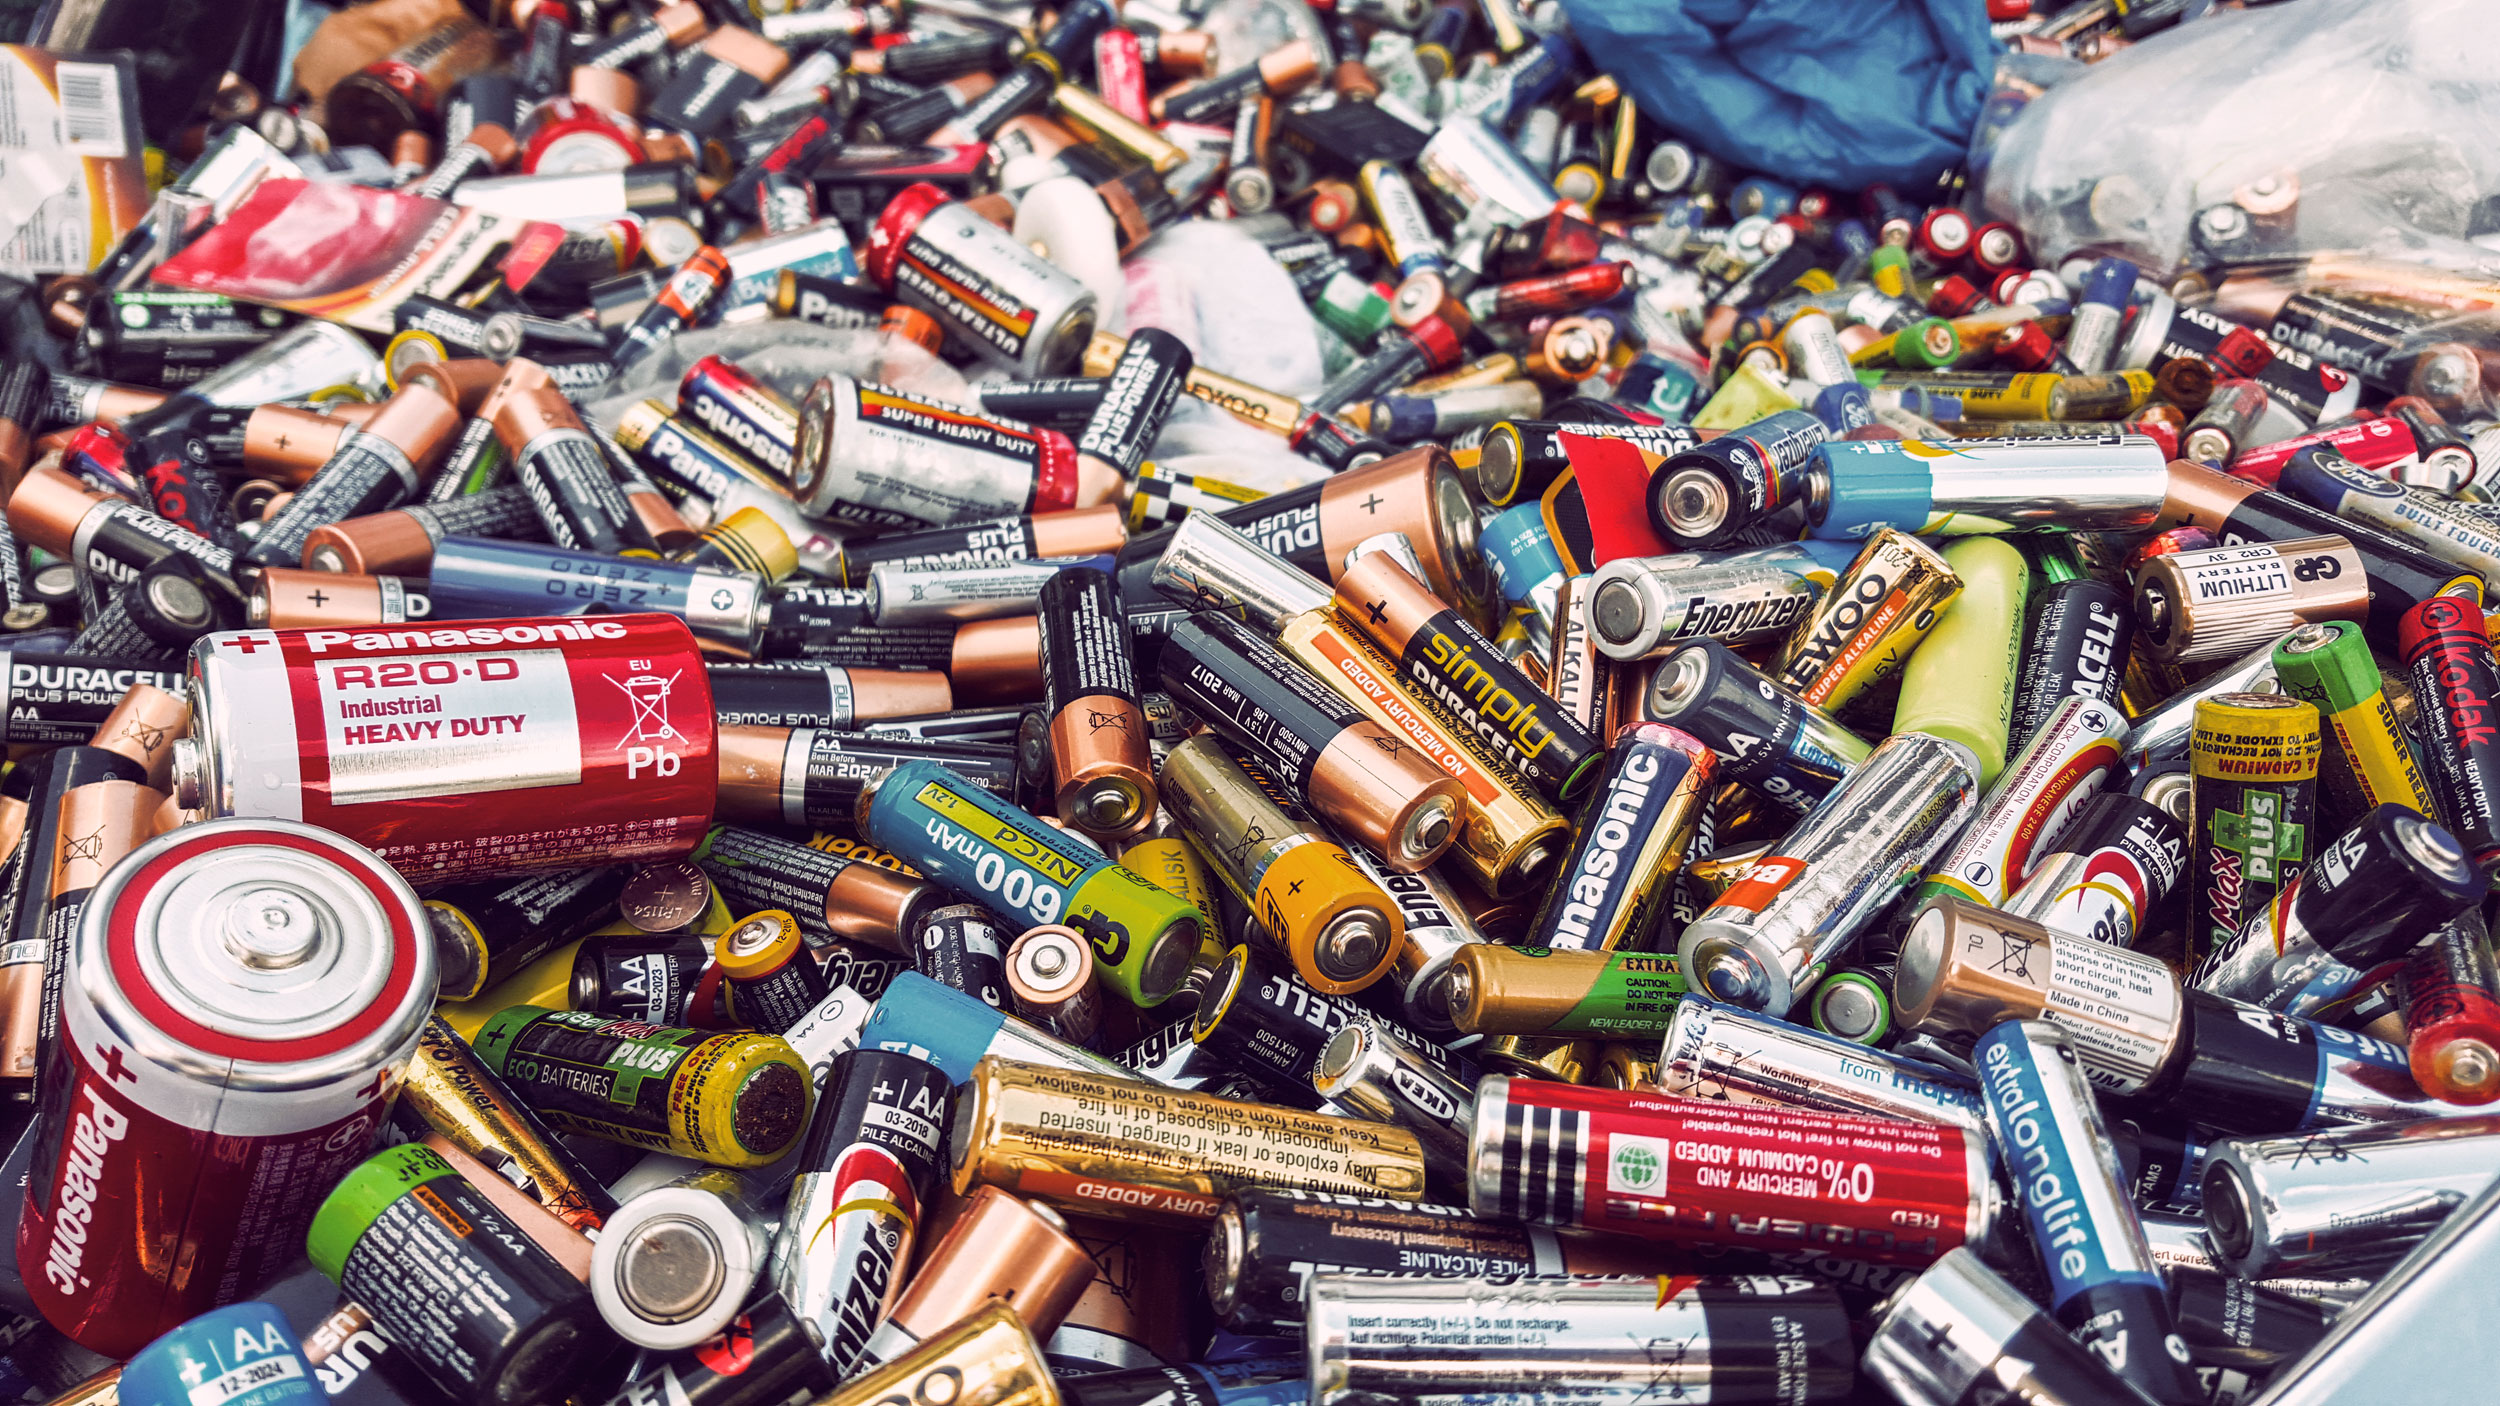 img-erp-org-old-batteries-to-recycling-578663071